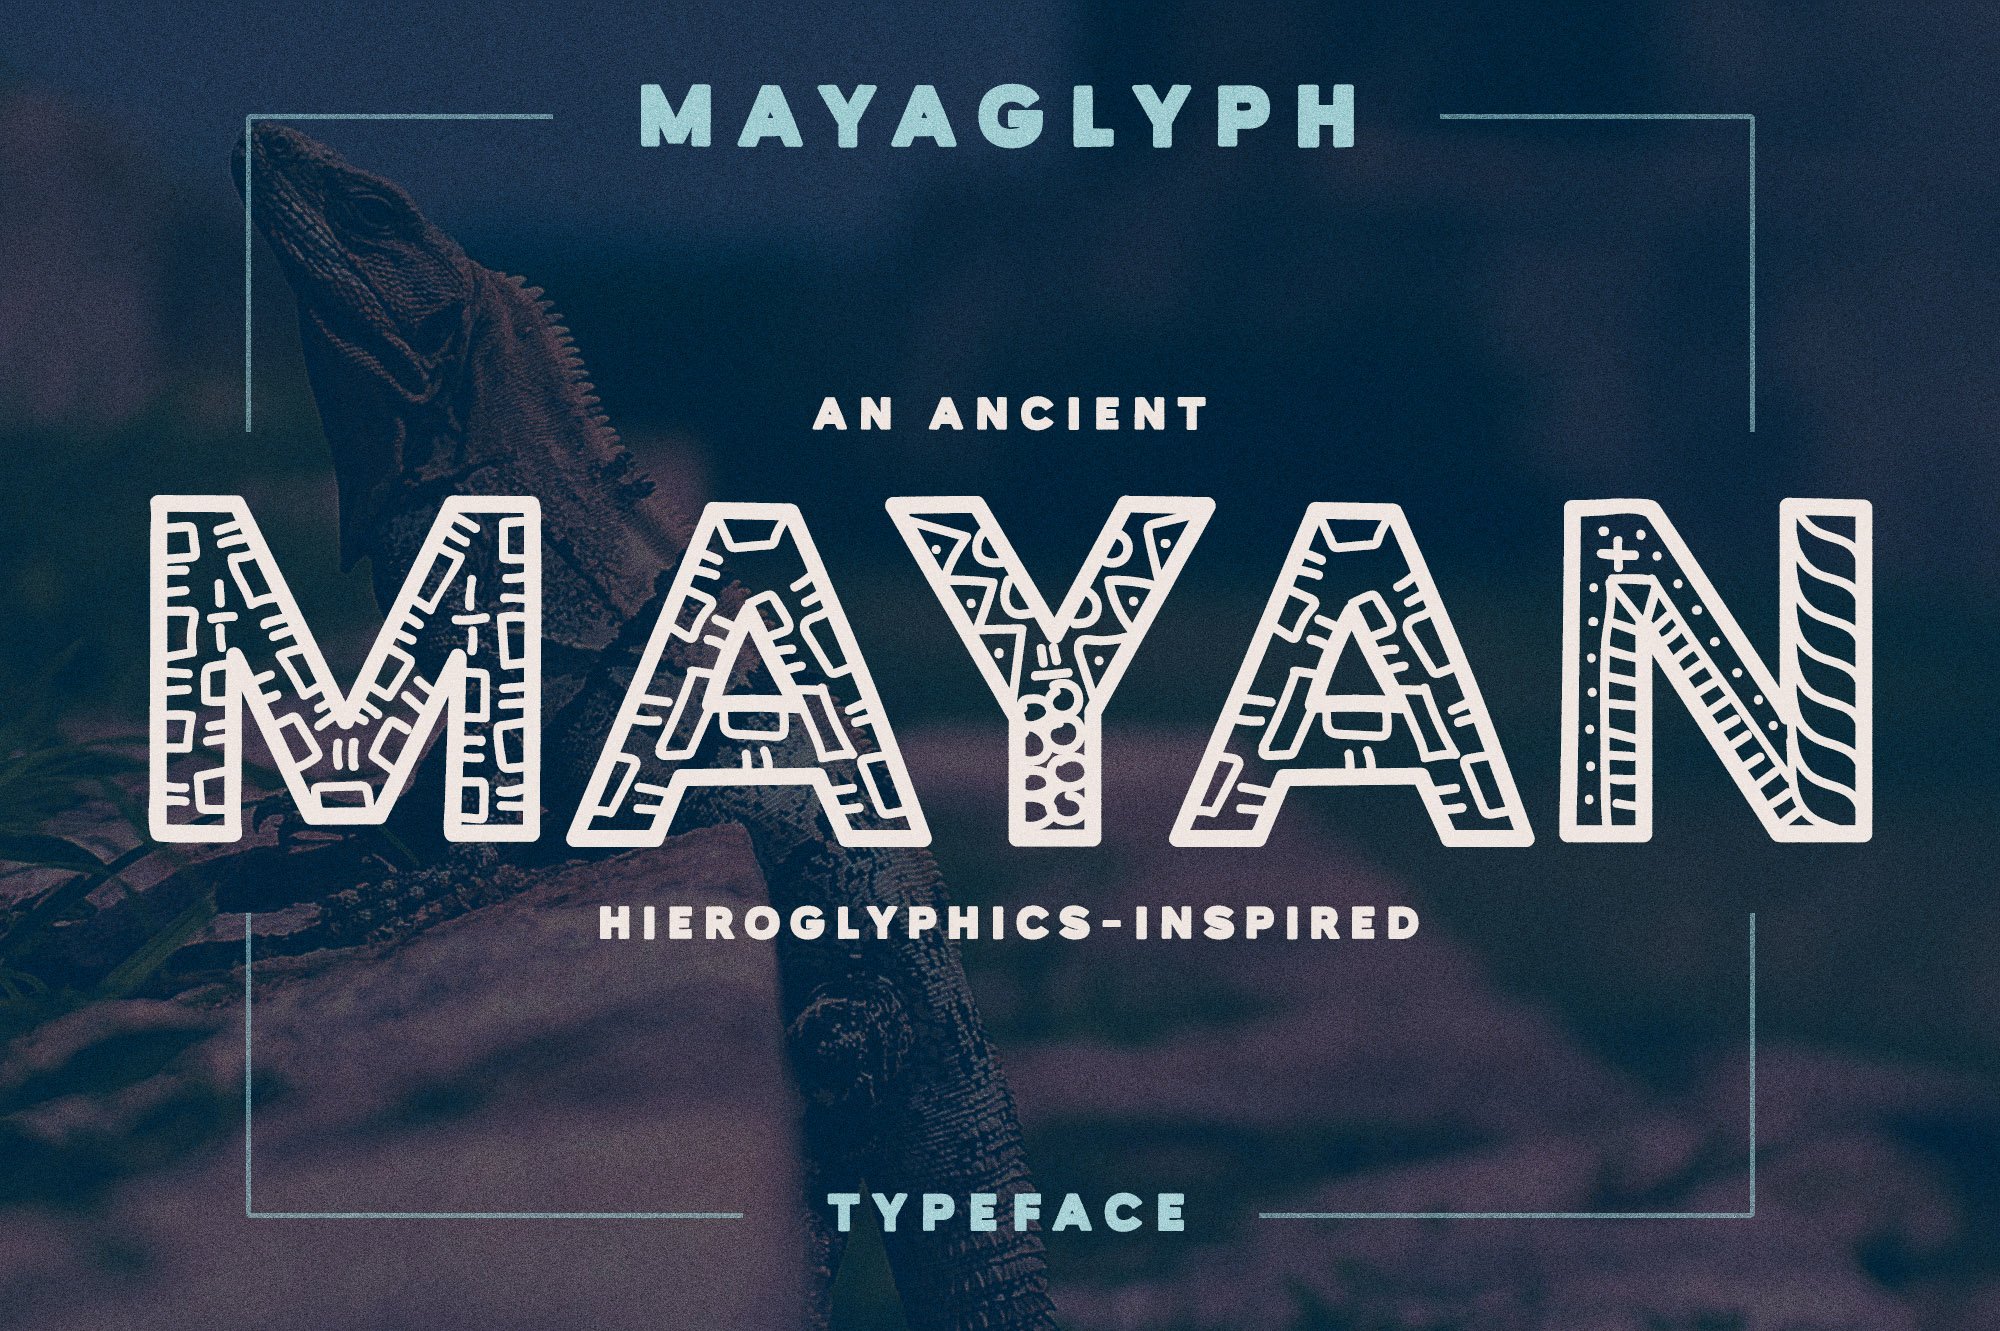 Mayaglyph Aztec Aesthetic Font cover image.